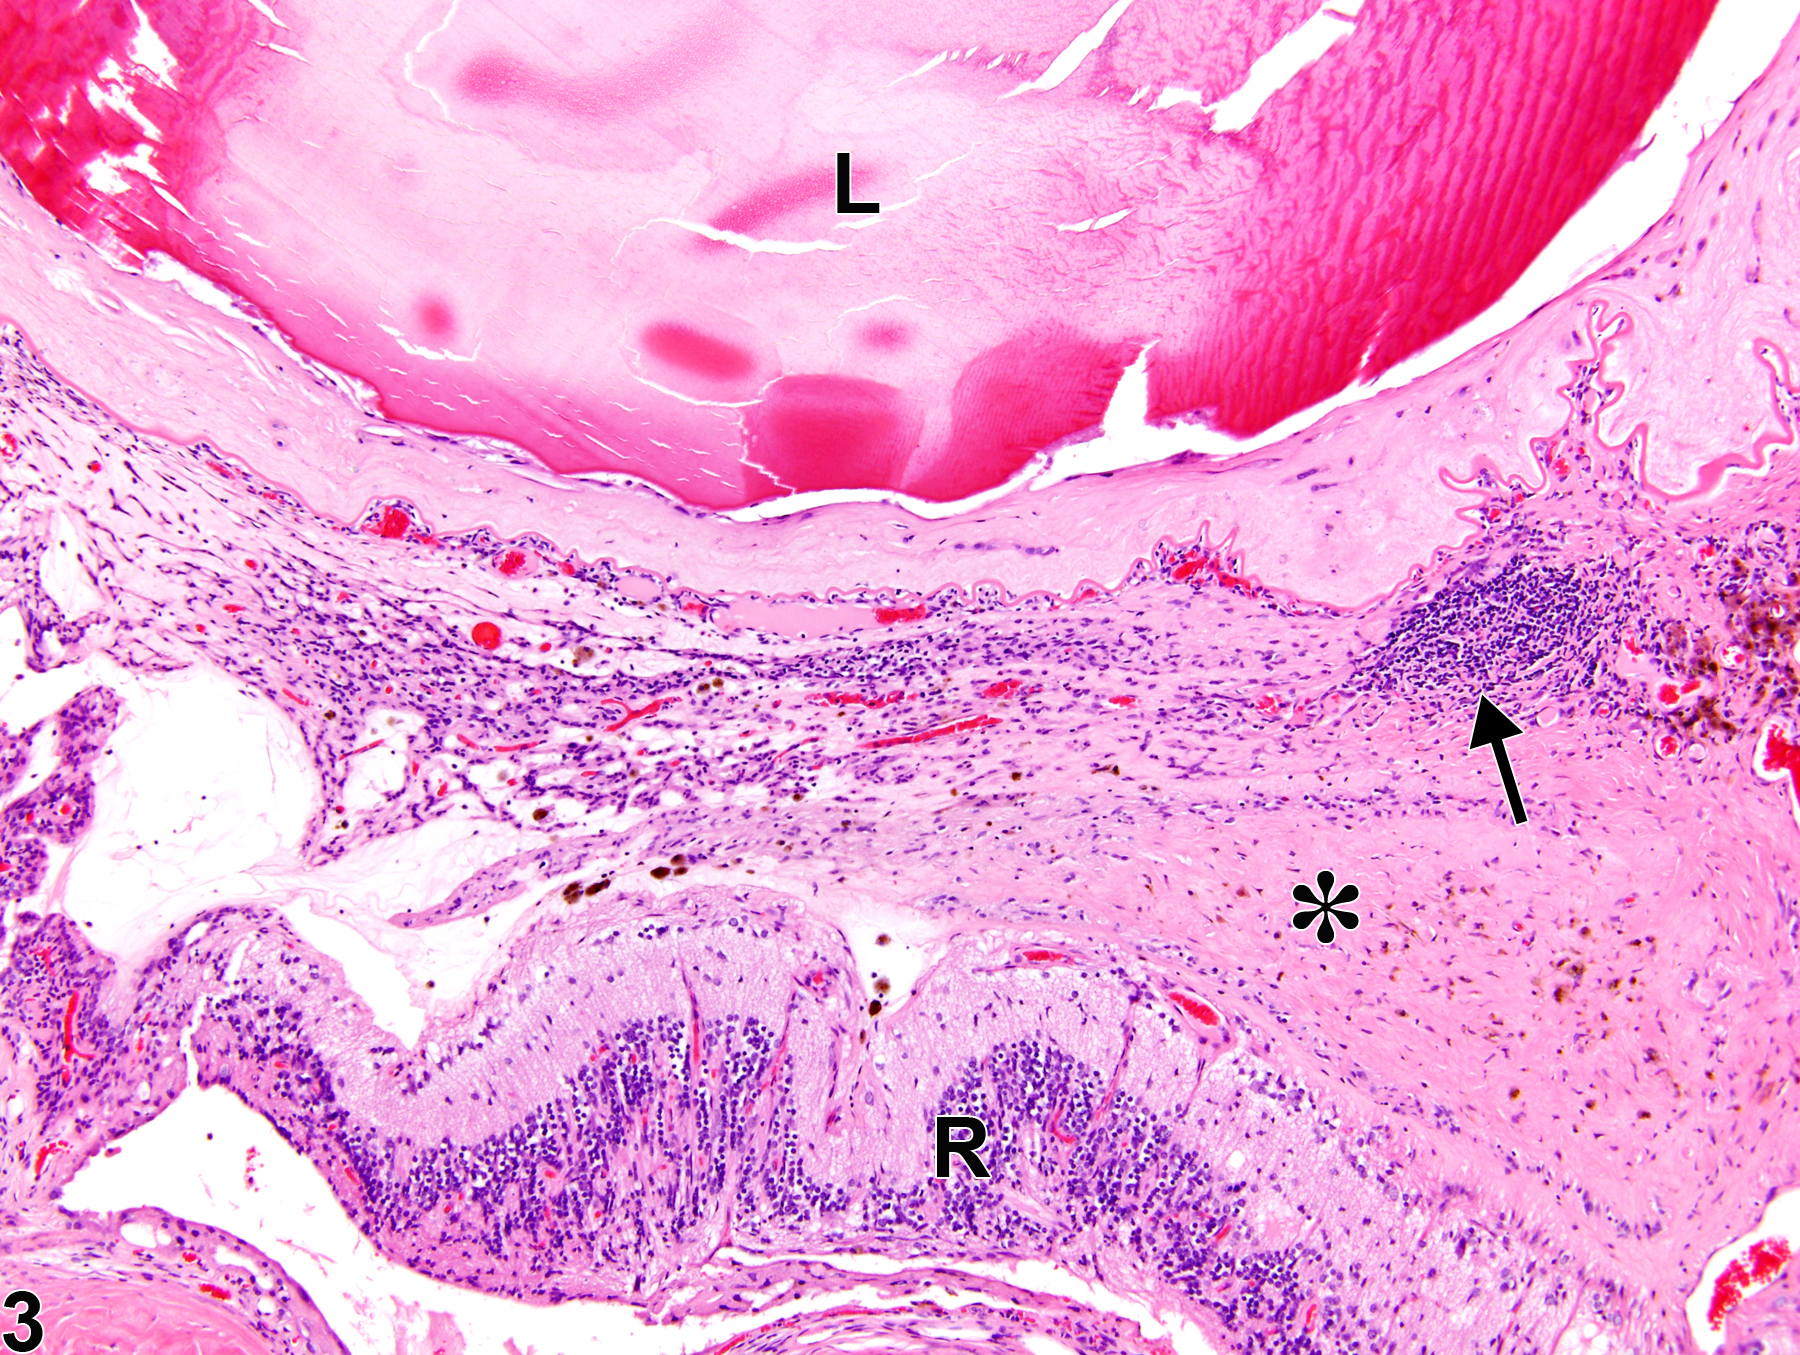 Image of vitreous fibrosis in the eye from a female F344/N rat in a chronic study